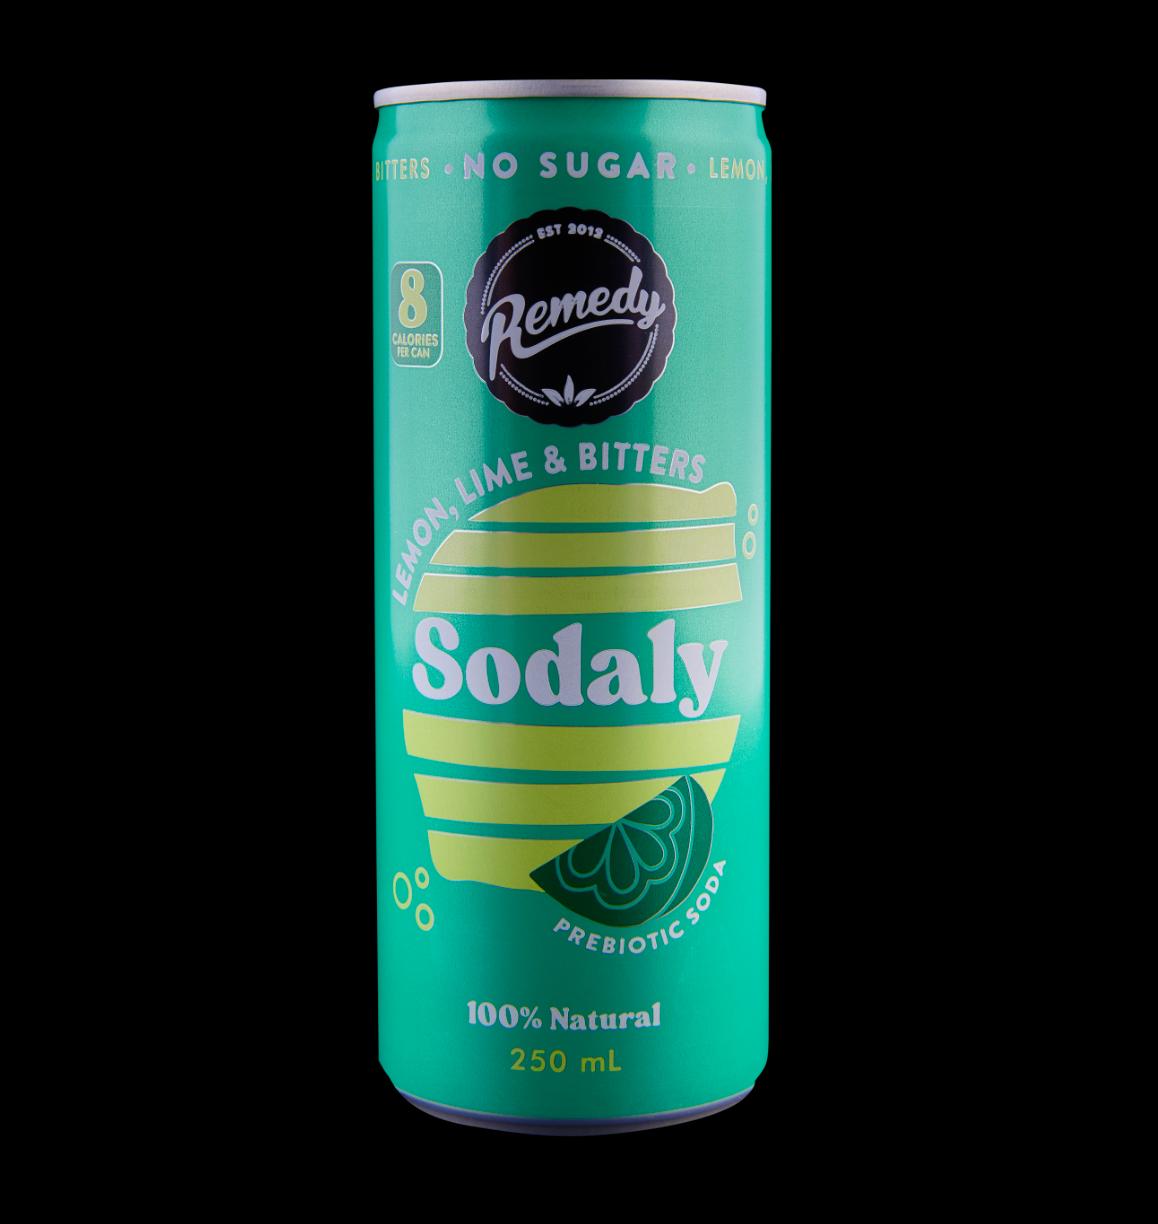 SODALY FLAVORED SODA (LEMON LIME BITTERS)